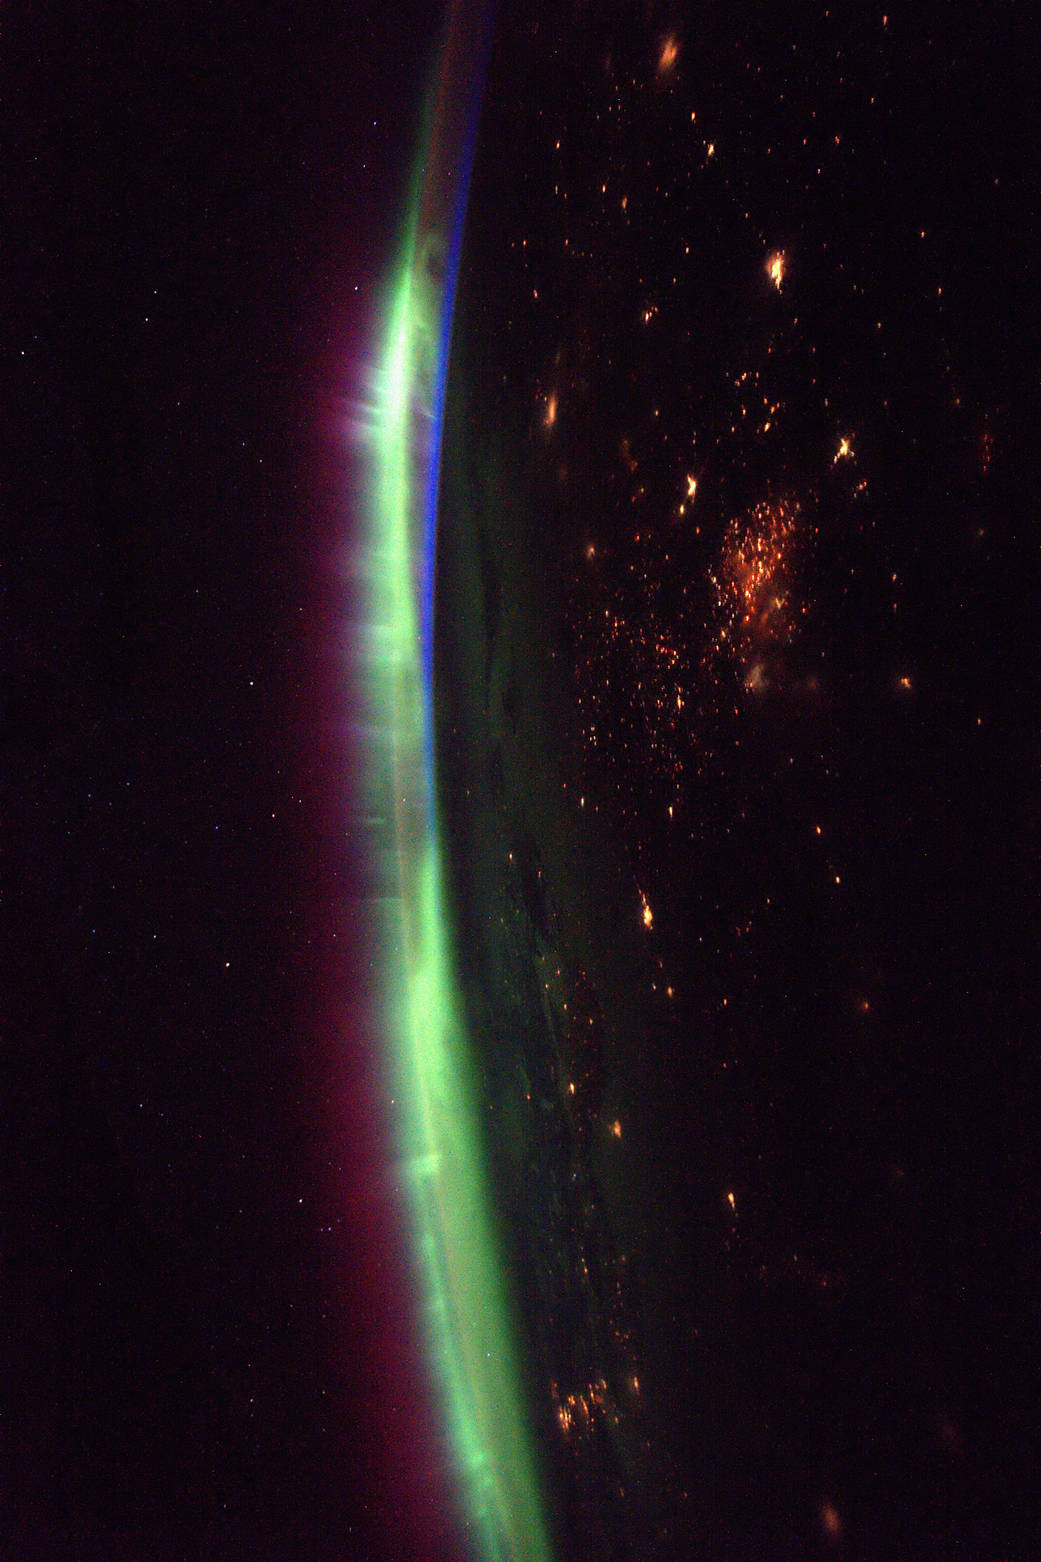 Aurora glowing on Earth's horizon with nighttime lights visible below